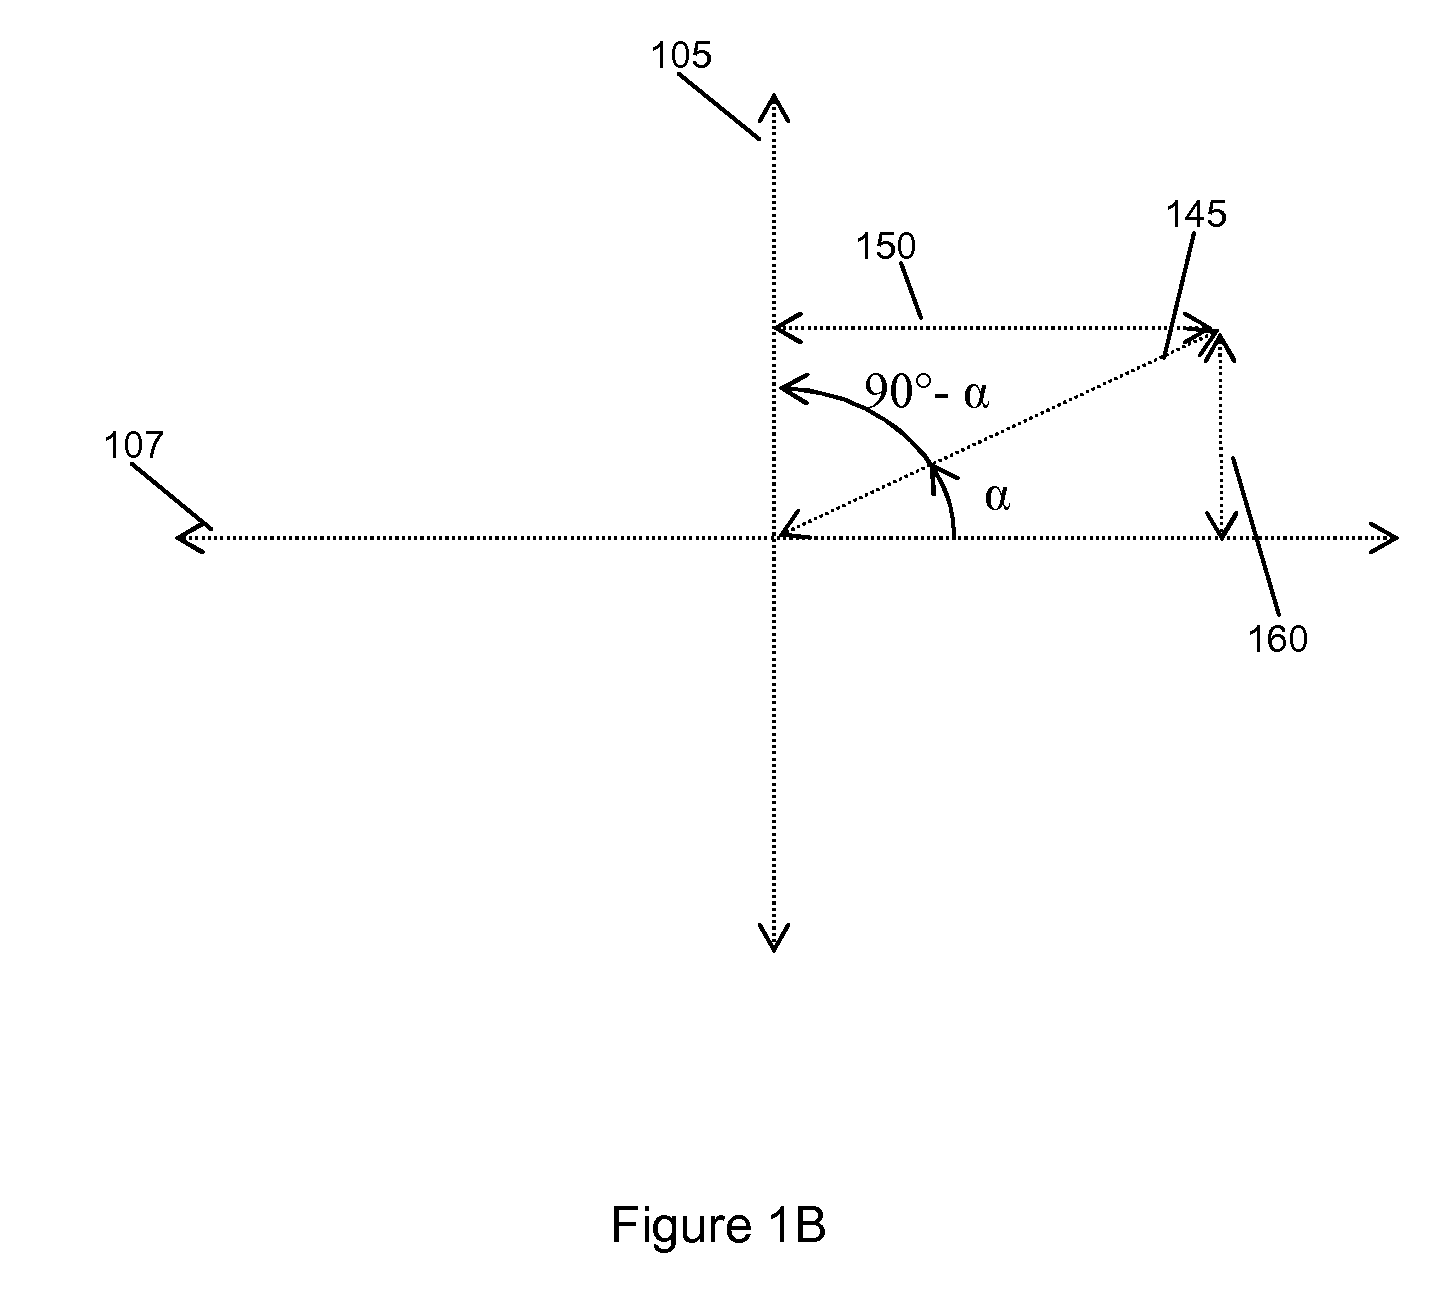 Systems and Methods for Non-Perpendicular Ultrasonic Plastic Welding